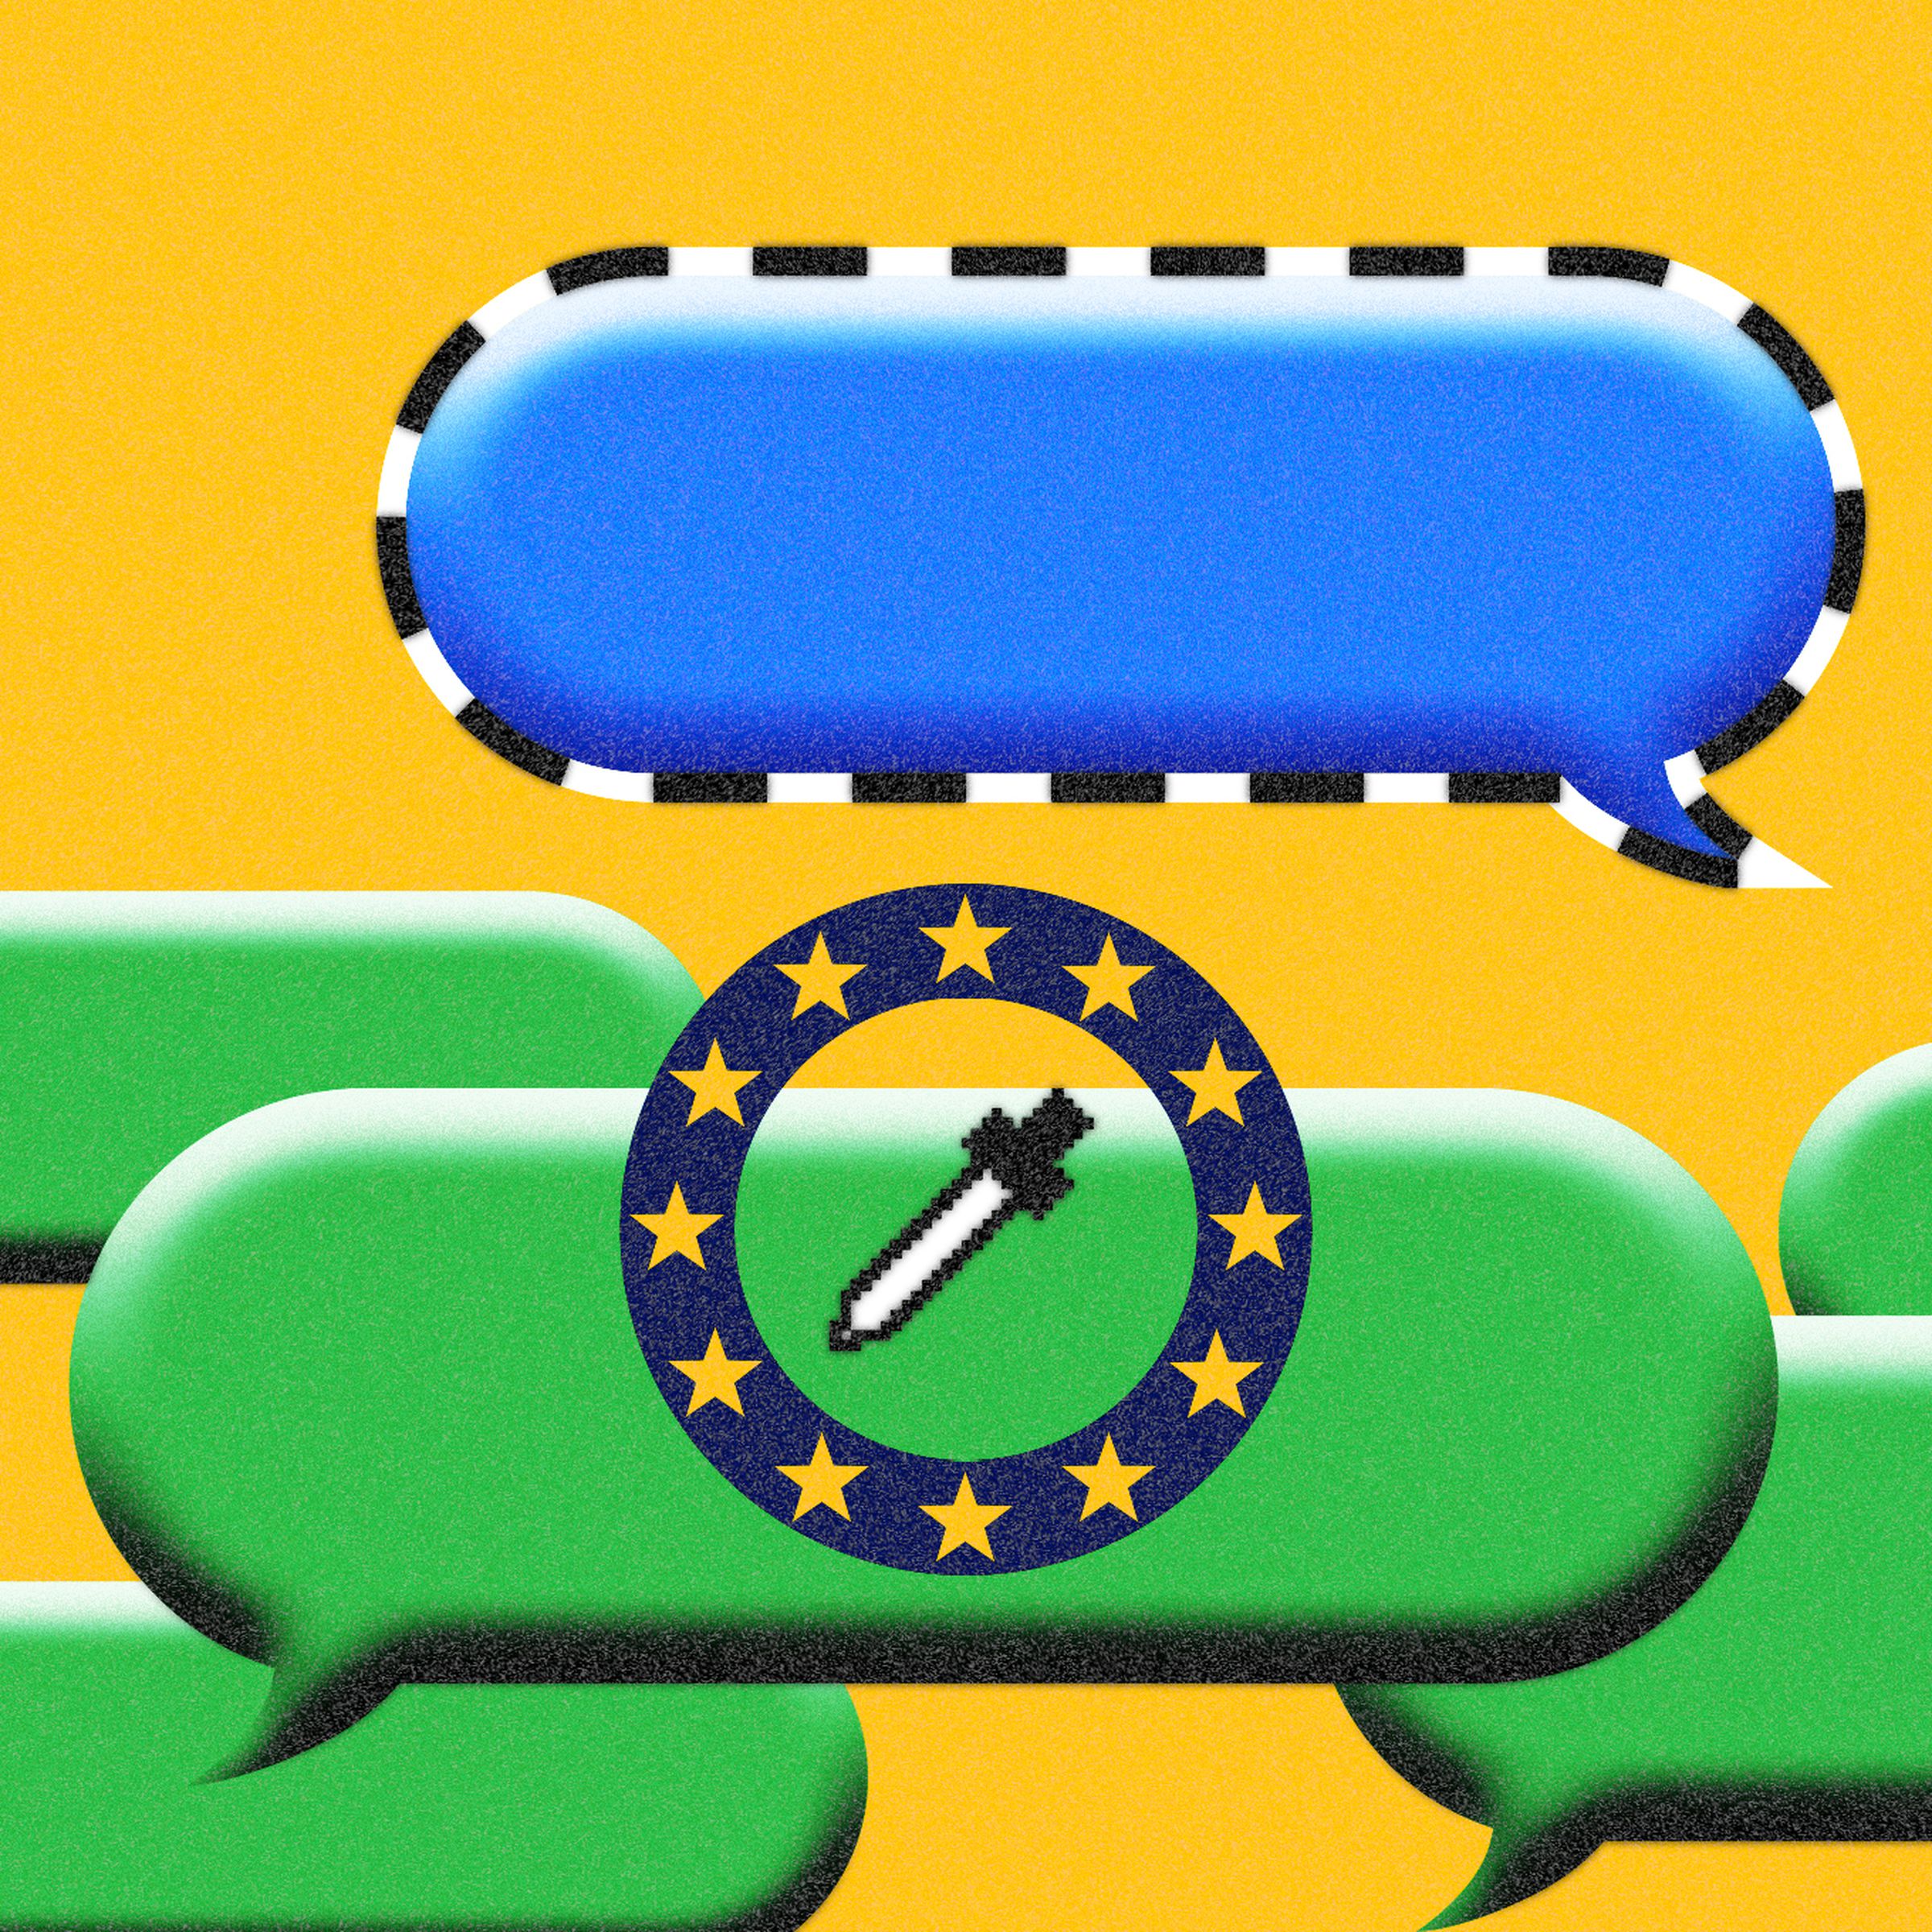 Illustration of a blue iMessage bubble selected to have its color changed by a digital colorpicker picking up the color green, to show the pressure on Apple to open up iMessage.